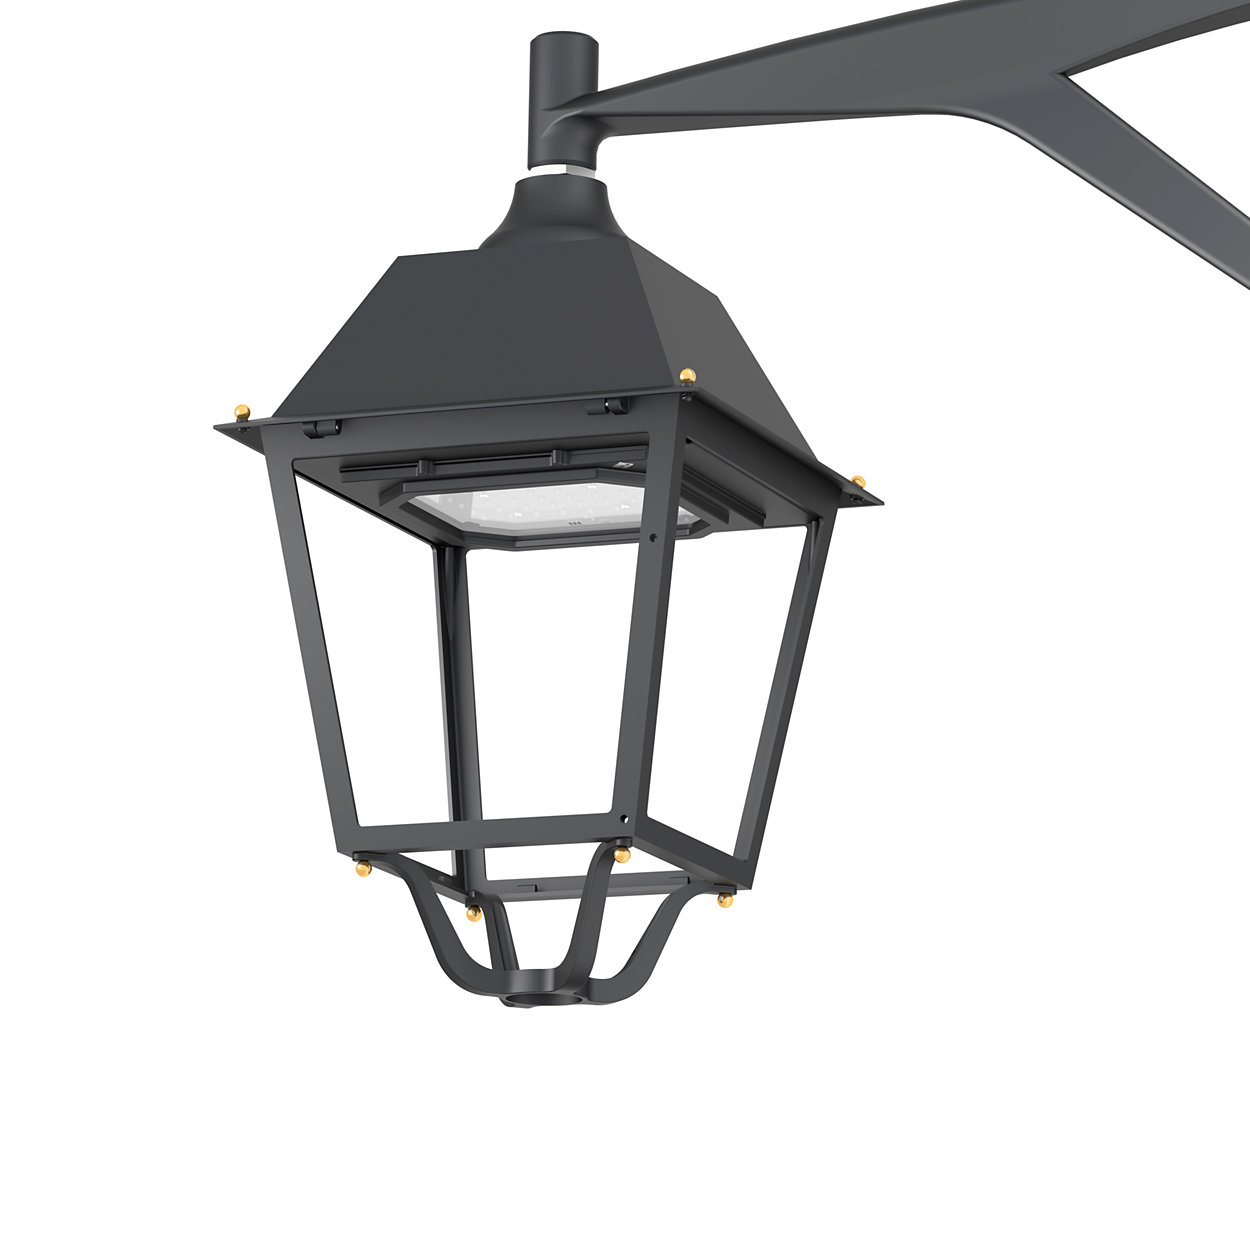 An iconic Iberian four-sided luminaire